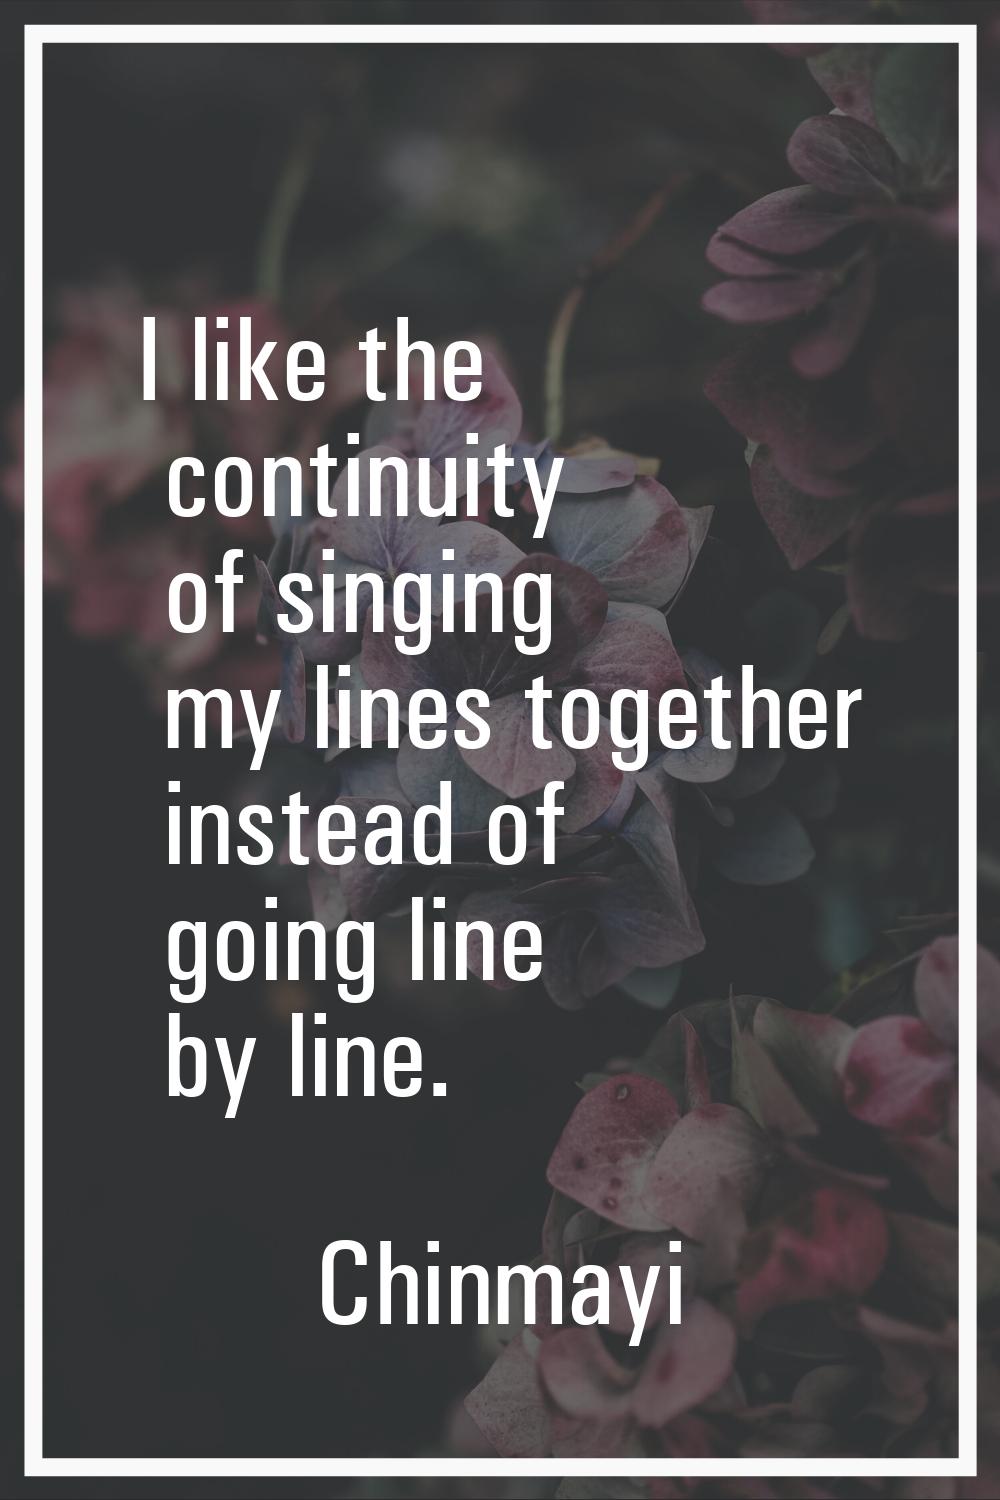 I like the continuity of singing my lines together instead of going line by line.